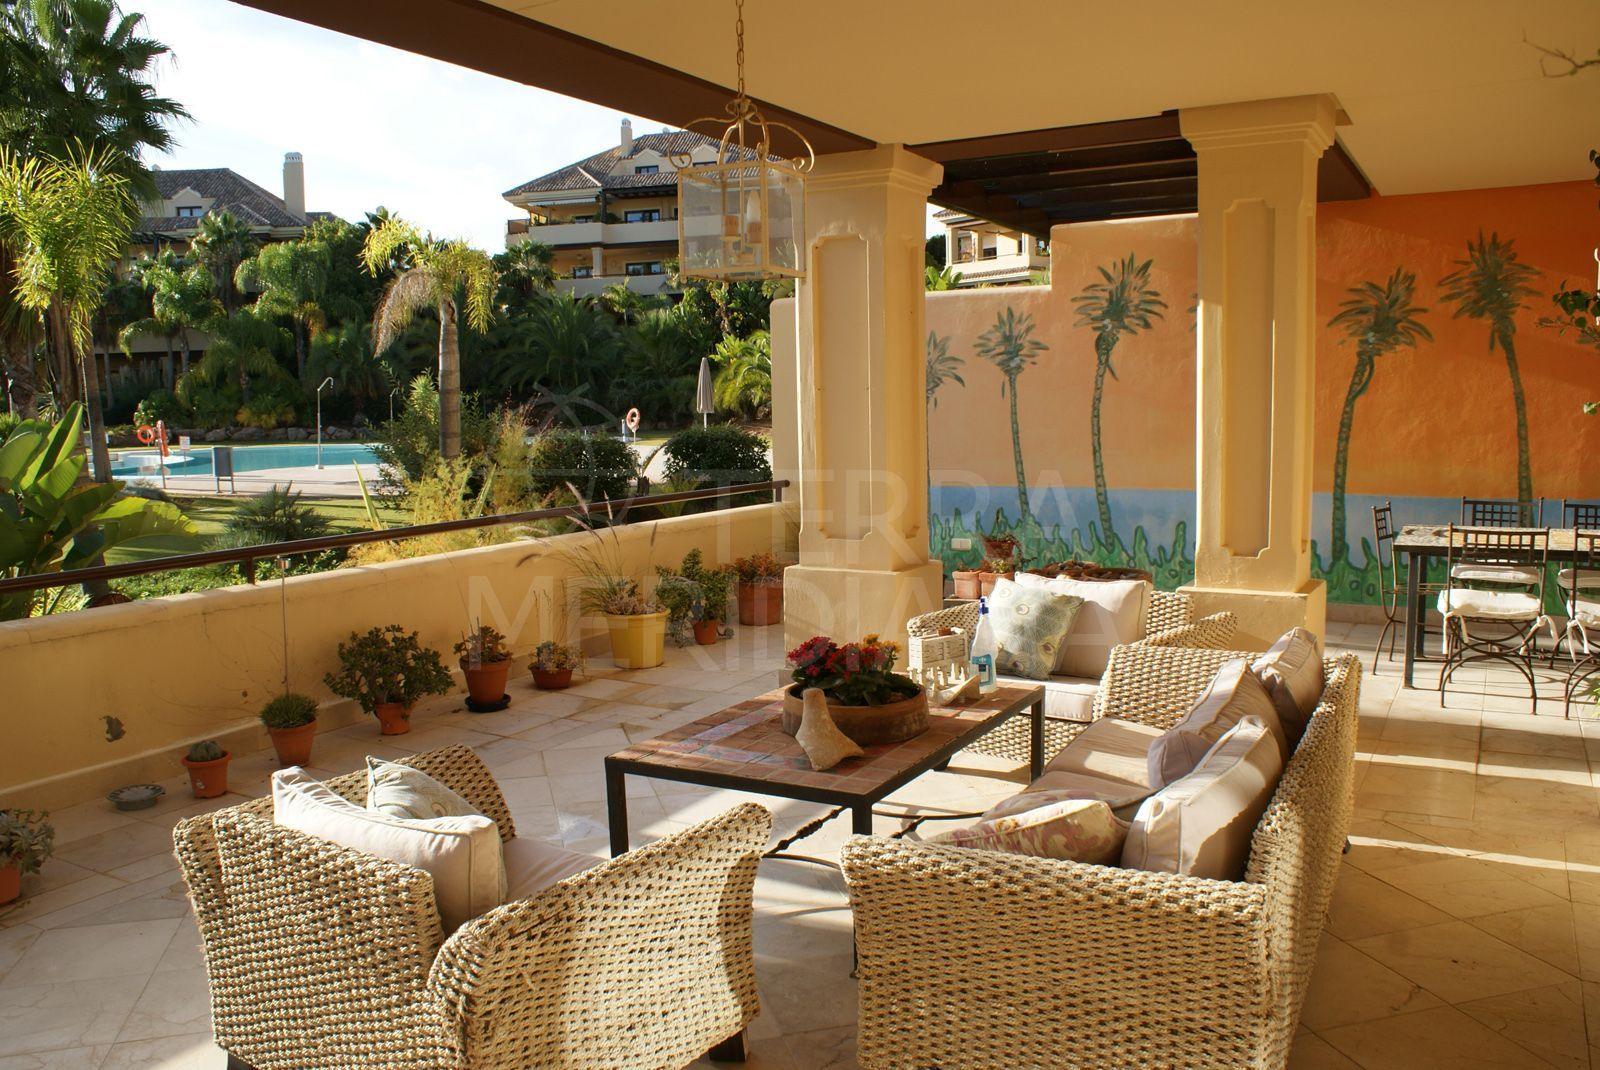 Gorgeous ground floor apartment for sale in the exclusive gated development of Valgrande, Sotogrande